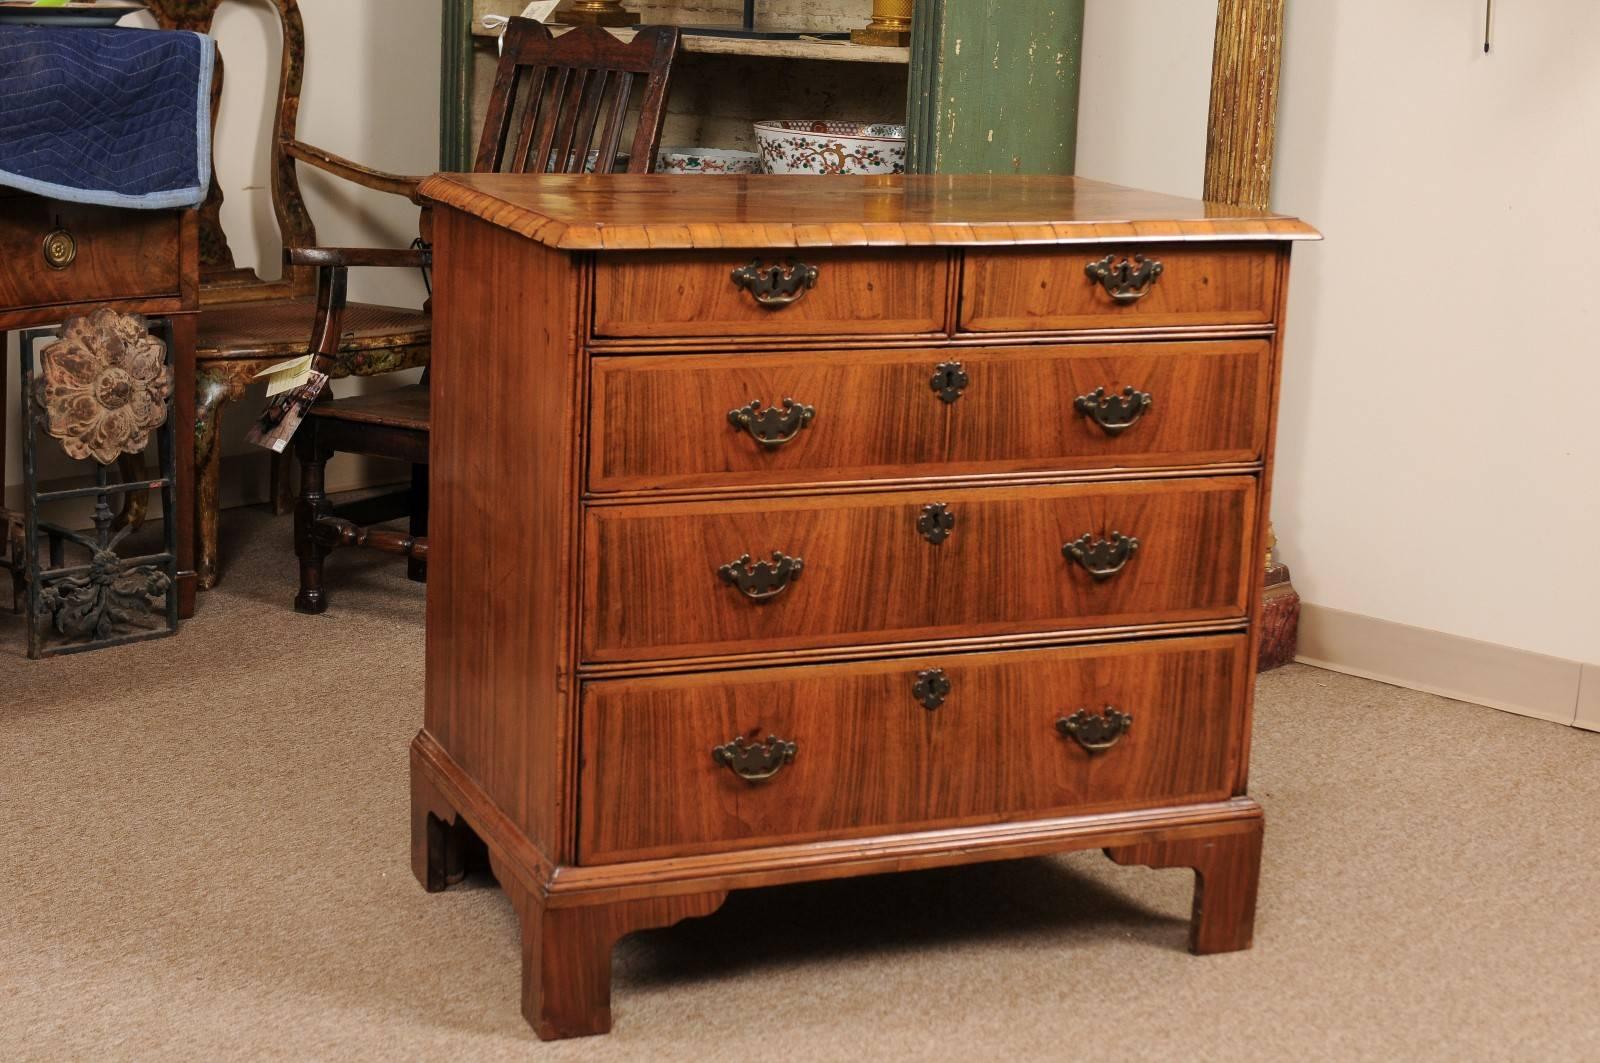 English early 18th century walnut chest with herringbone inlay, crossbanding, five drawers with brass pulls and all resting on shaped bracket feet. 

William Word Fine Antiques: Atlanta's source for antique interiors since 1956.